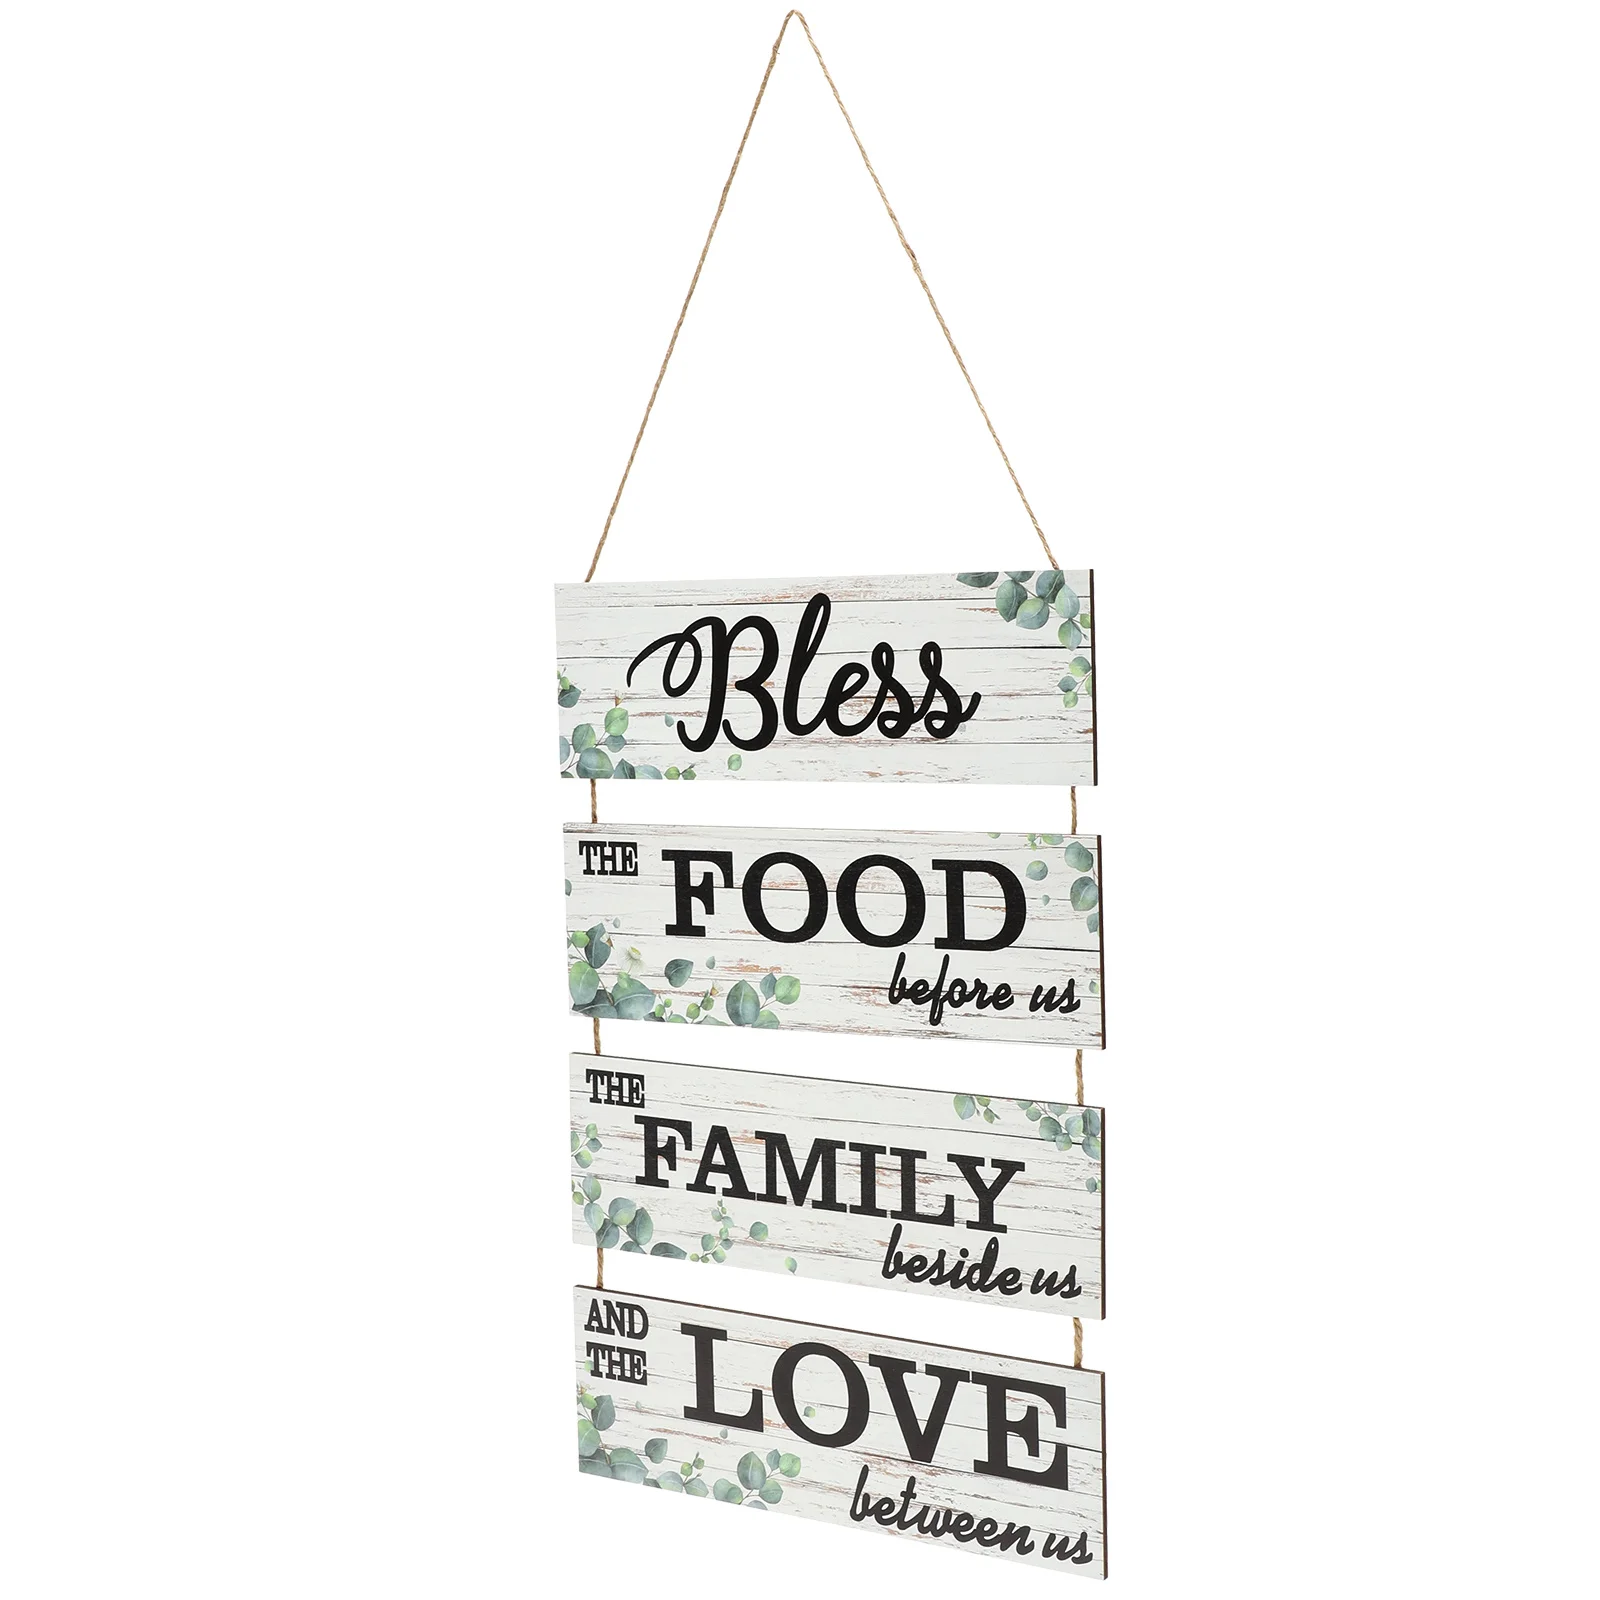 

Widely- Sturdy Creative Wear-resistant Wooden Wall Hanging Wooden Wall Decor Farmhouse Wall Decor for Home Restaurant Office